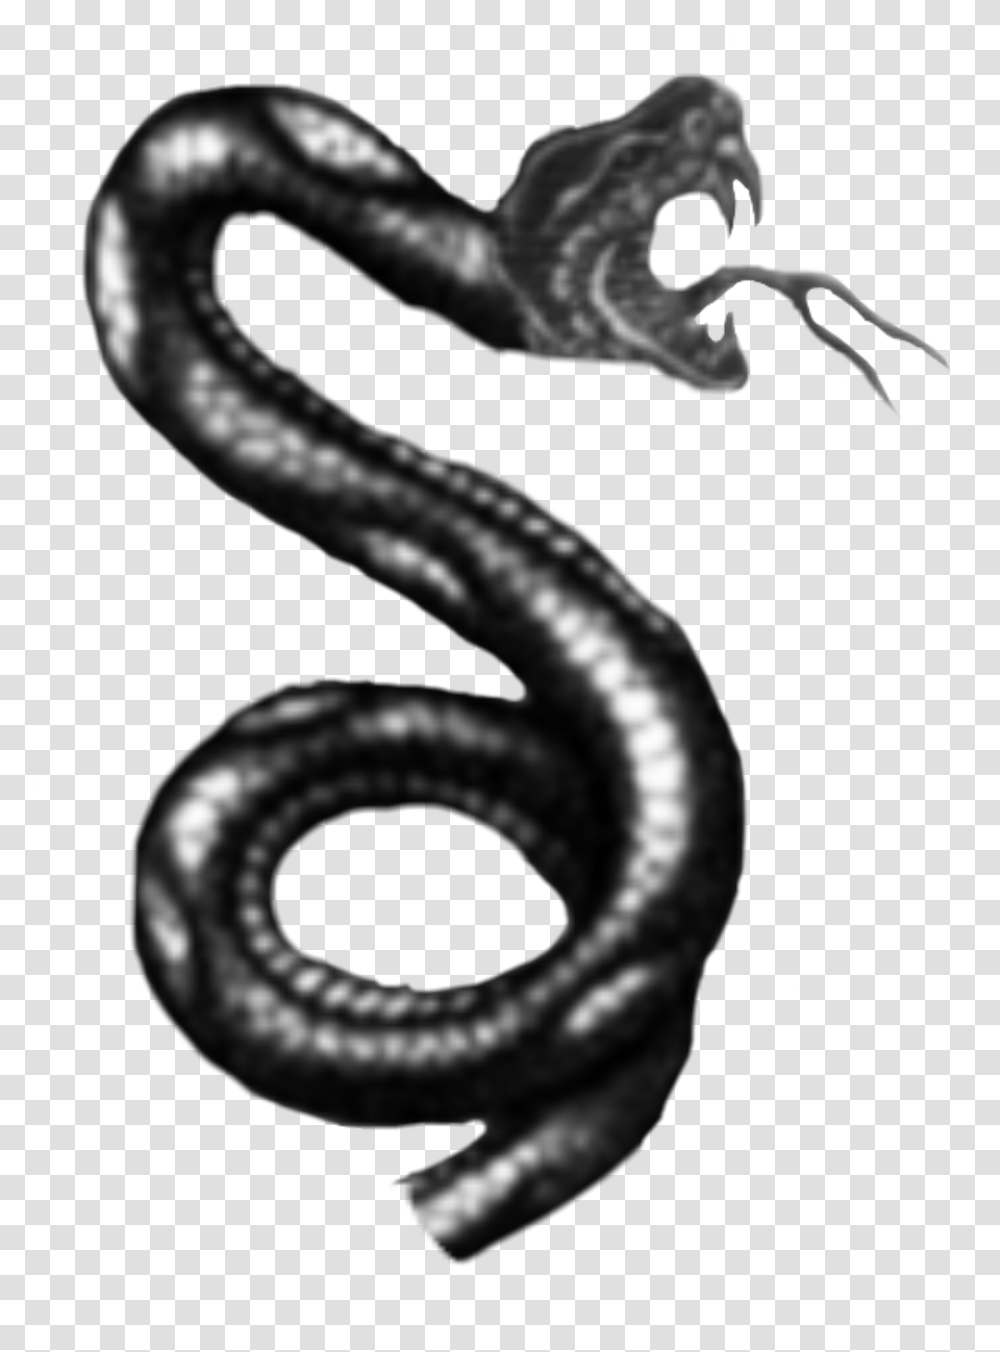 Black And White Snake Tattoo Designs, Animal, Reptile, Sea Life, Sea Snake Transparent Png